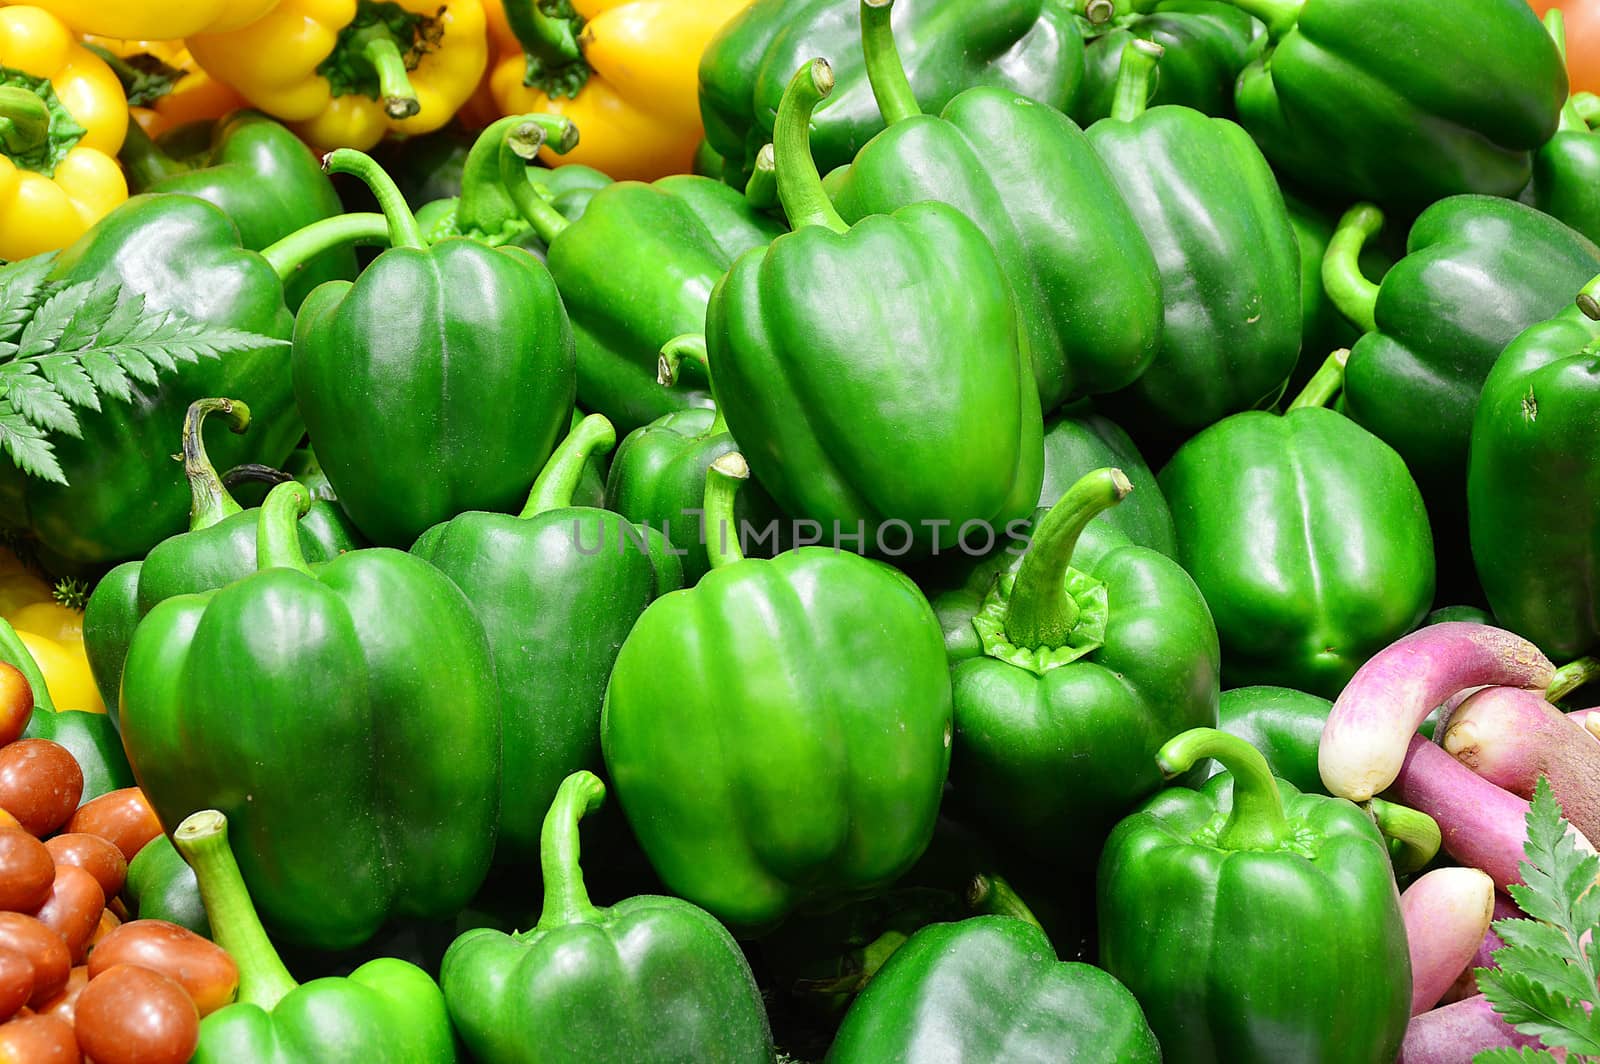 ripe Yellow, Red and Green Peppers in Vegetables Market, Chiangmai Thailand